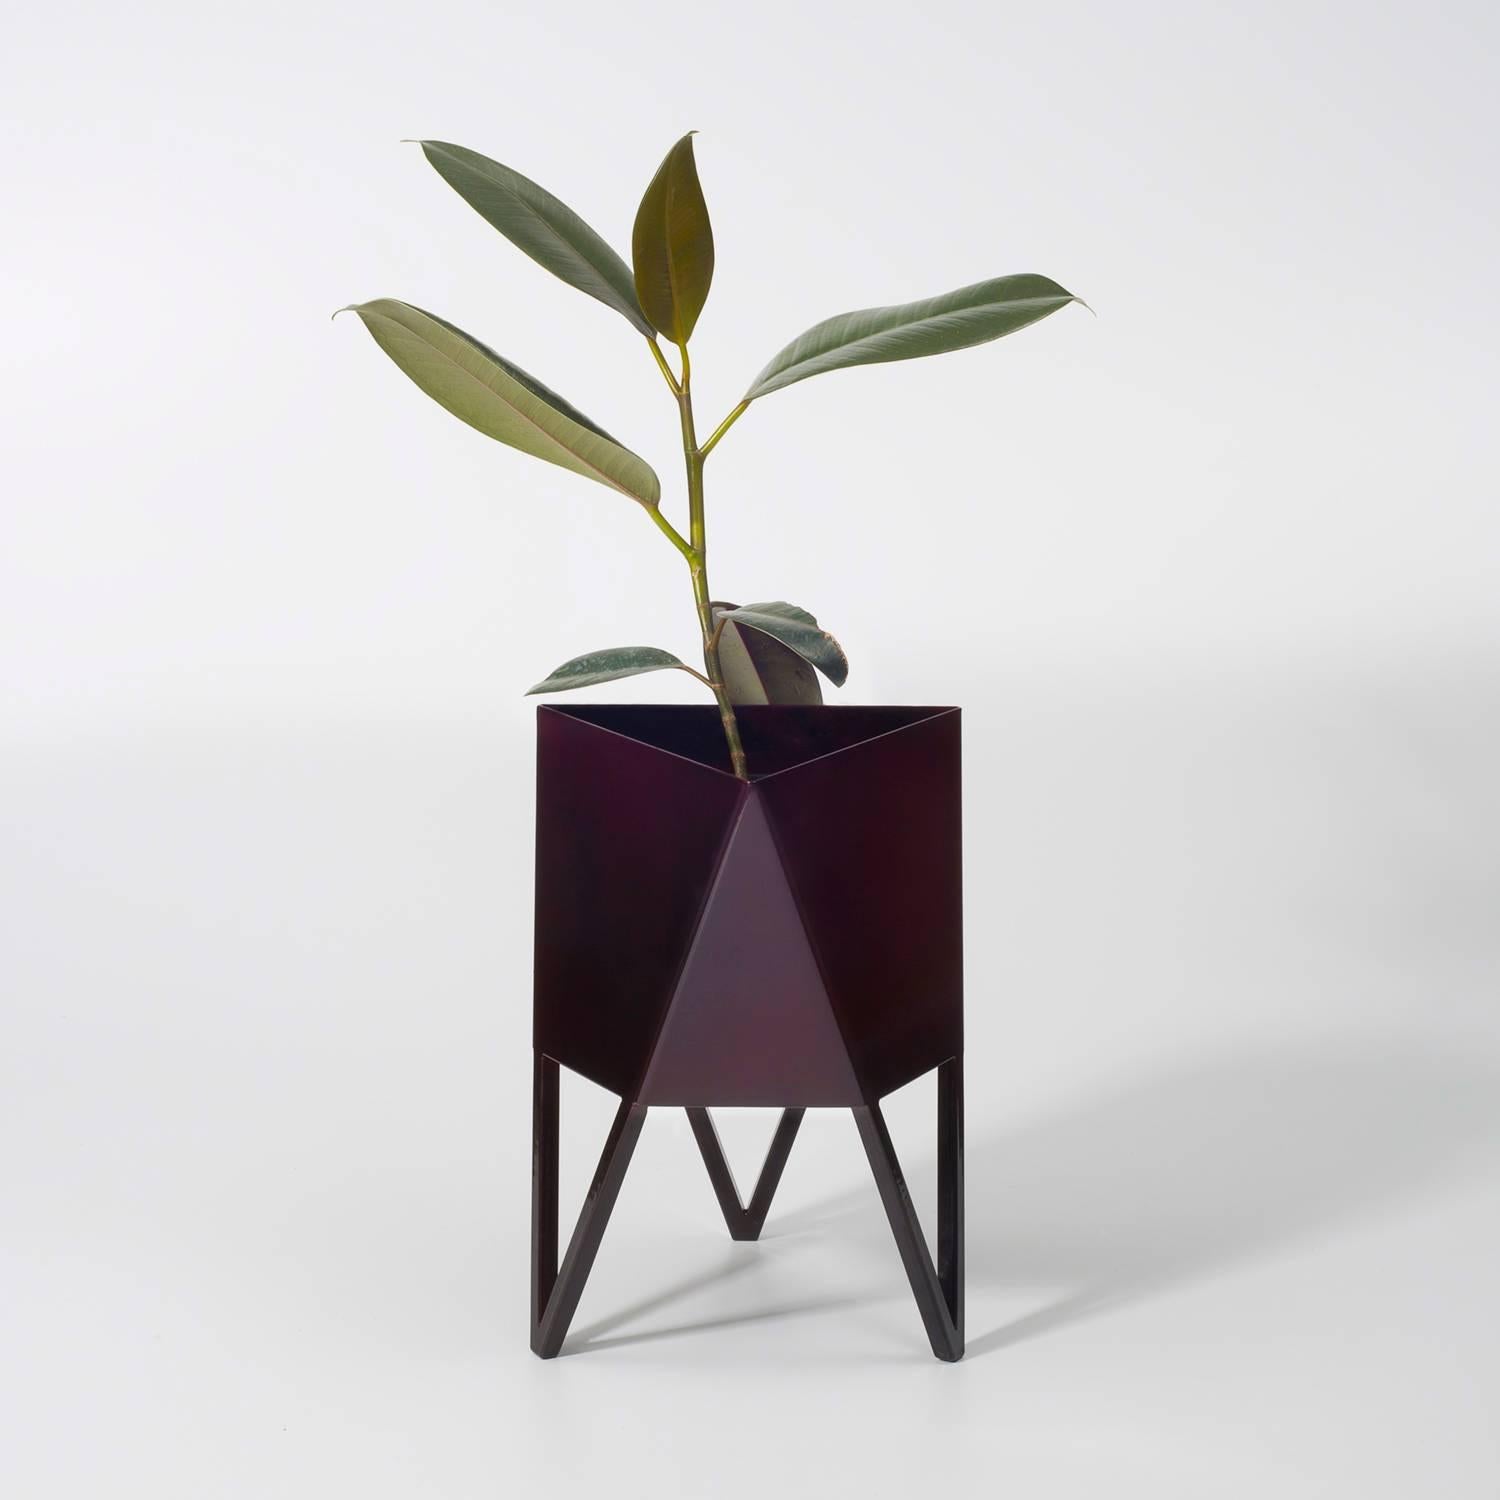 Small Deca Planter, Light Pink, Steel, Modern, Geometric by Force/Collide 4